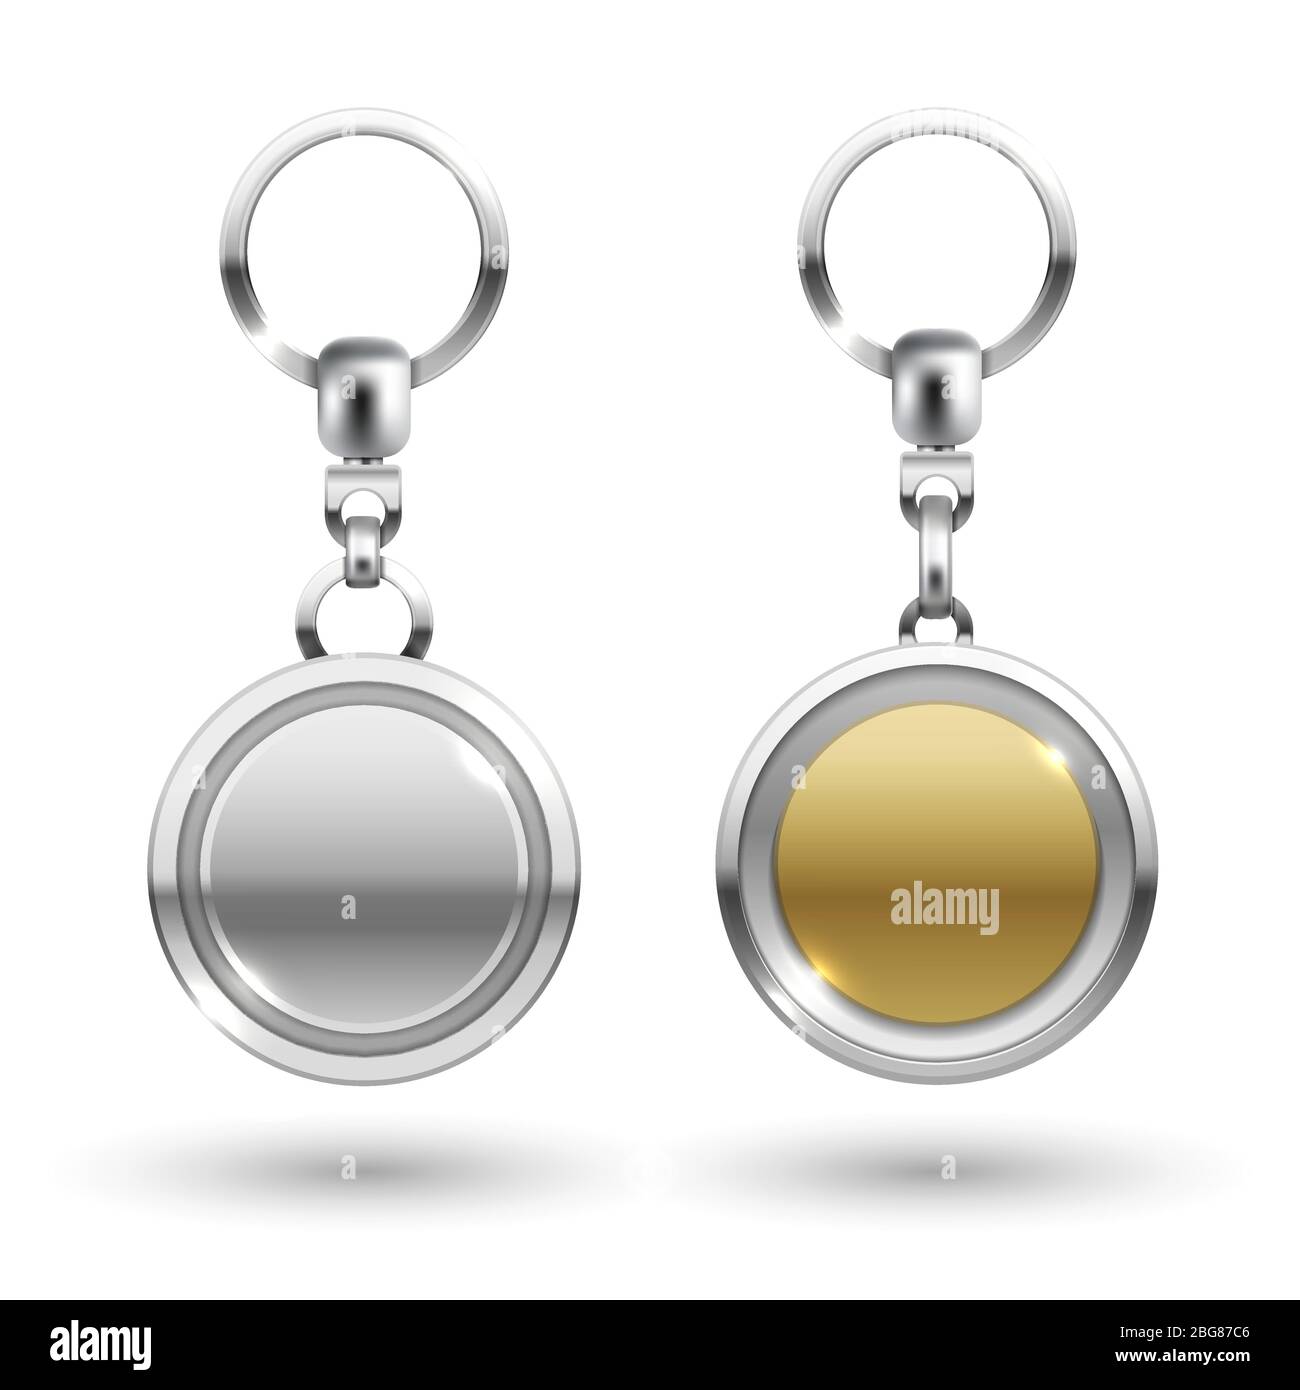 Realistic silver and gold keychains in different round shapes isolated on white background. Vector illustration Stock Vector